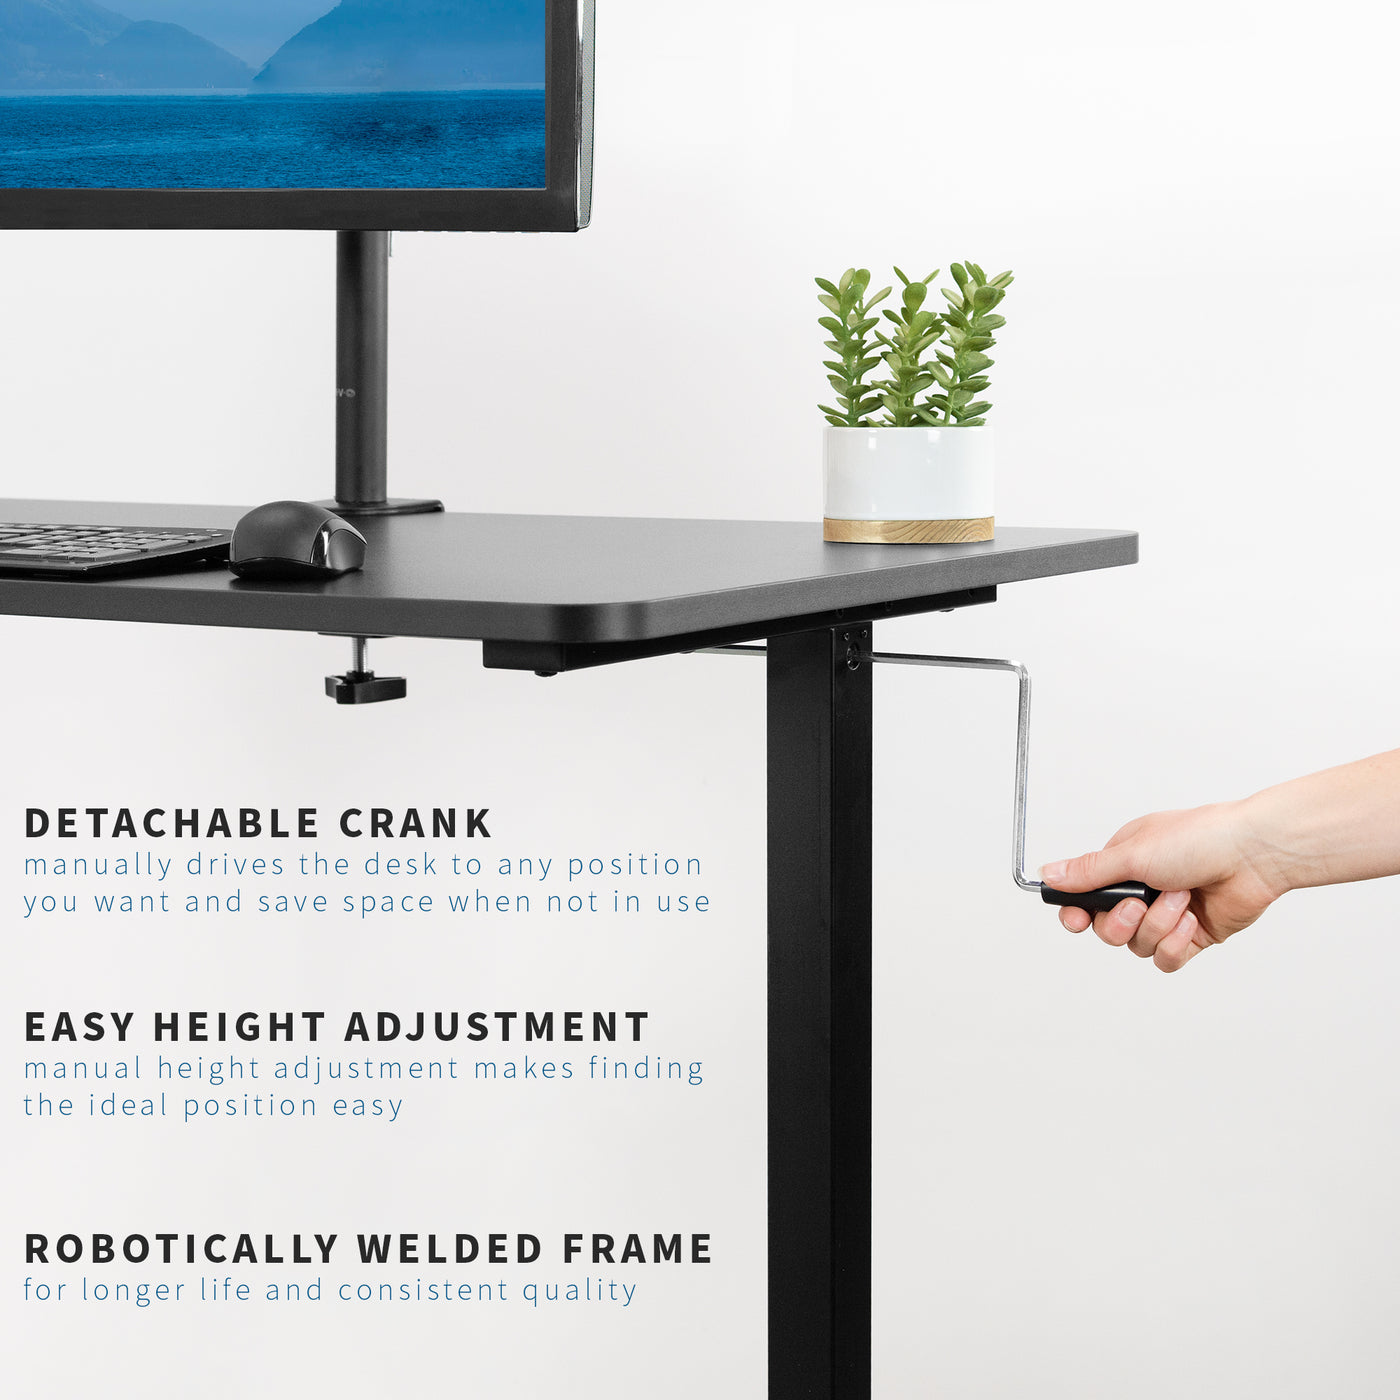 Easy to use height adjustment hand crank featured on the side of the desk.